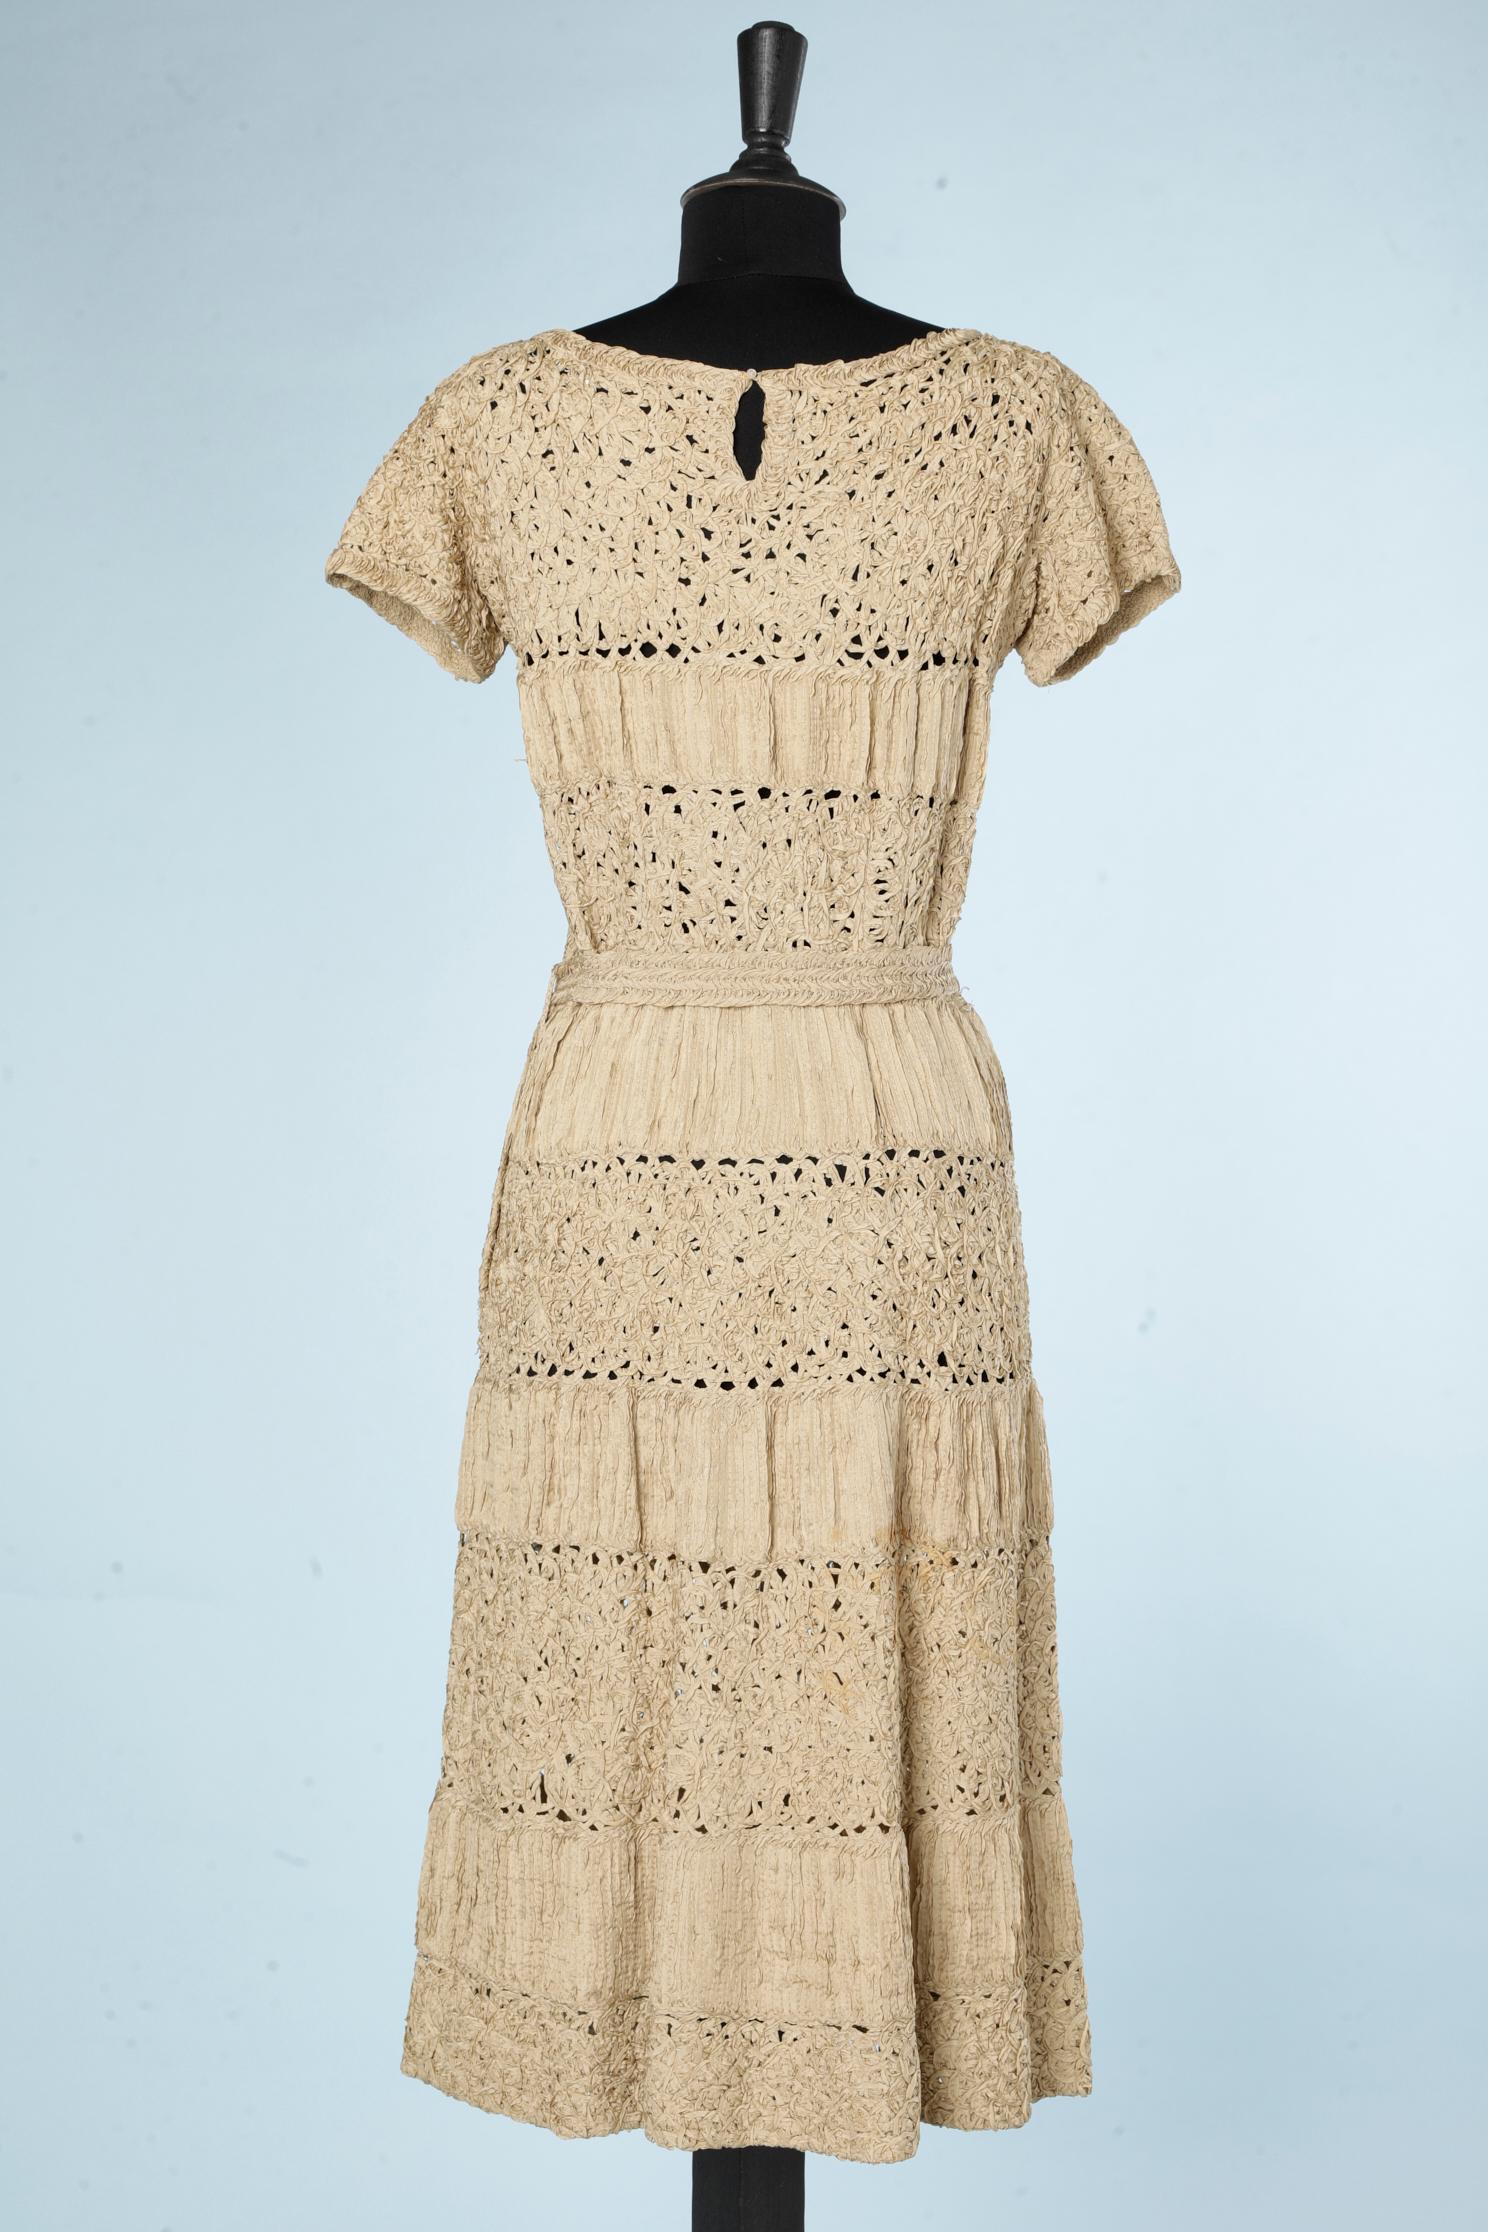 Beige dress knitted with ribbons LANA Circa 1940/50 For Sale 1